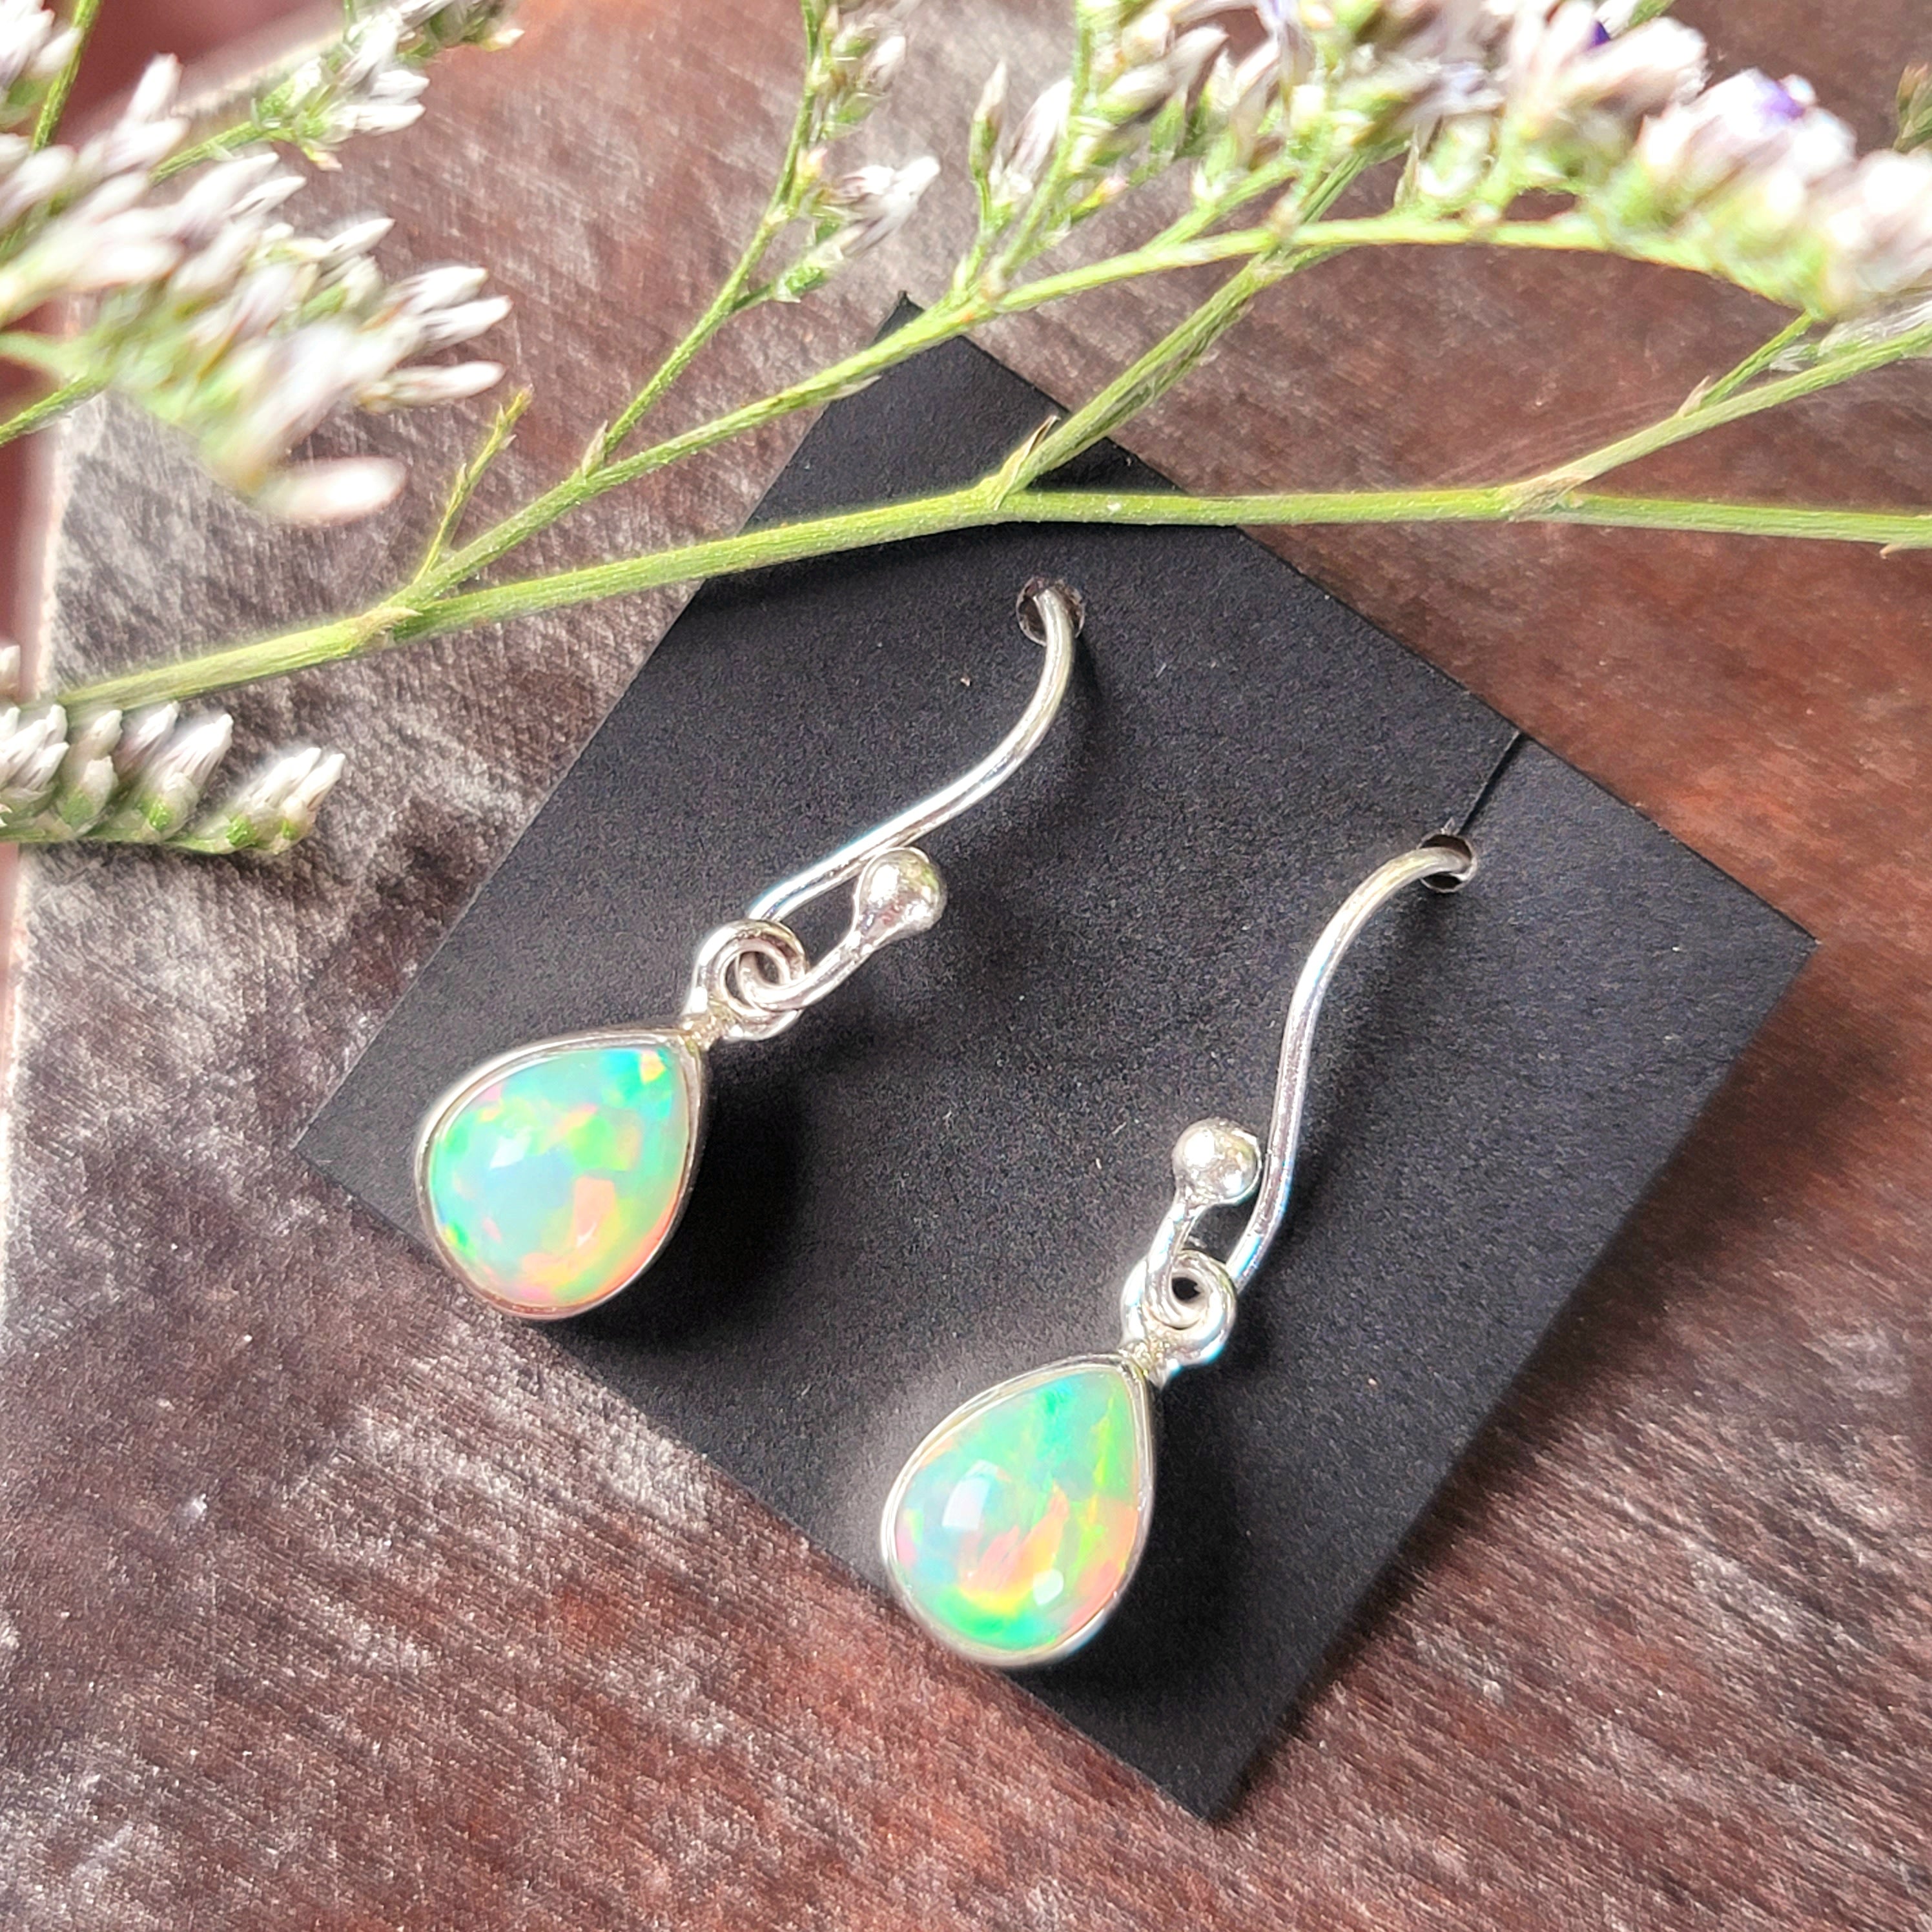 Ethiopian Opal Earrings .925 Silver for Creativity, Joy and Self Discovery